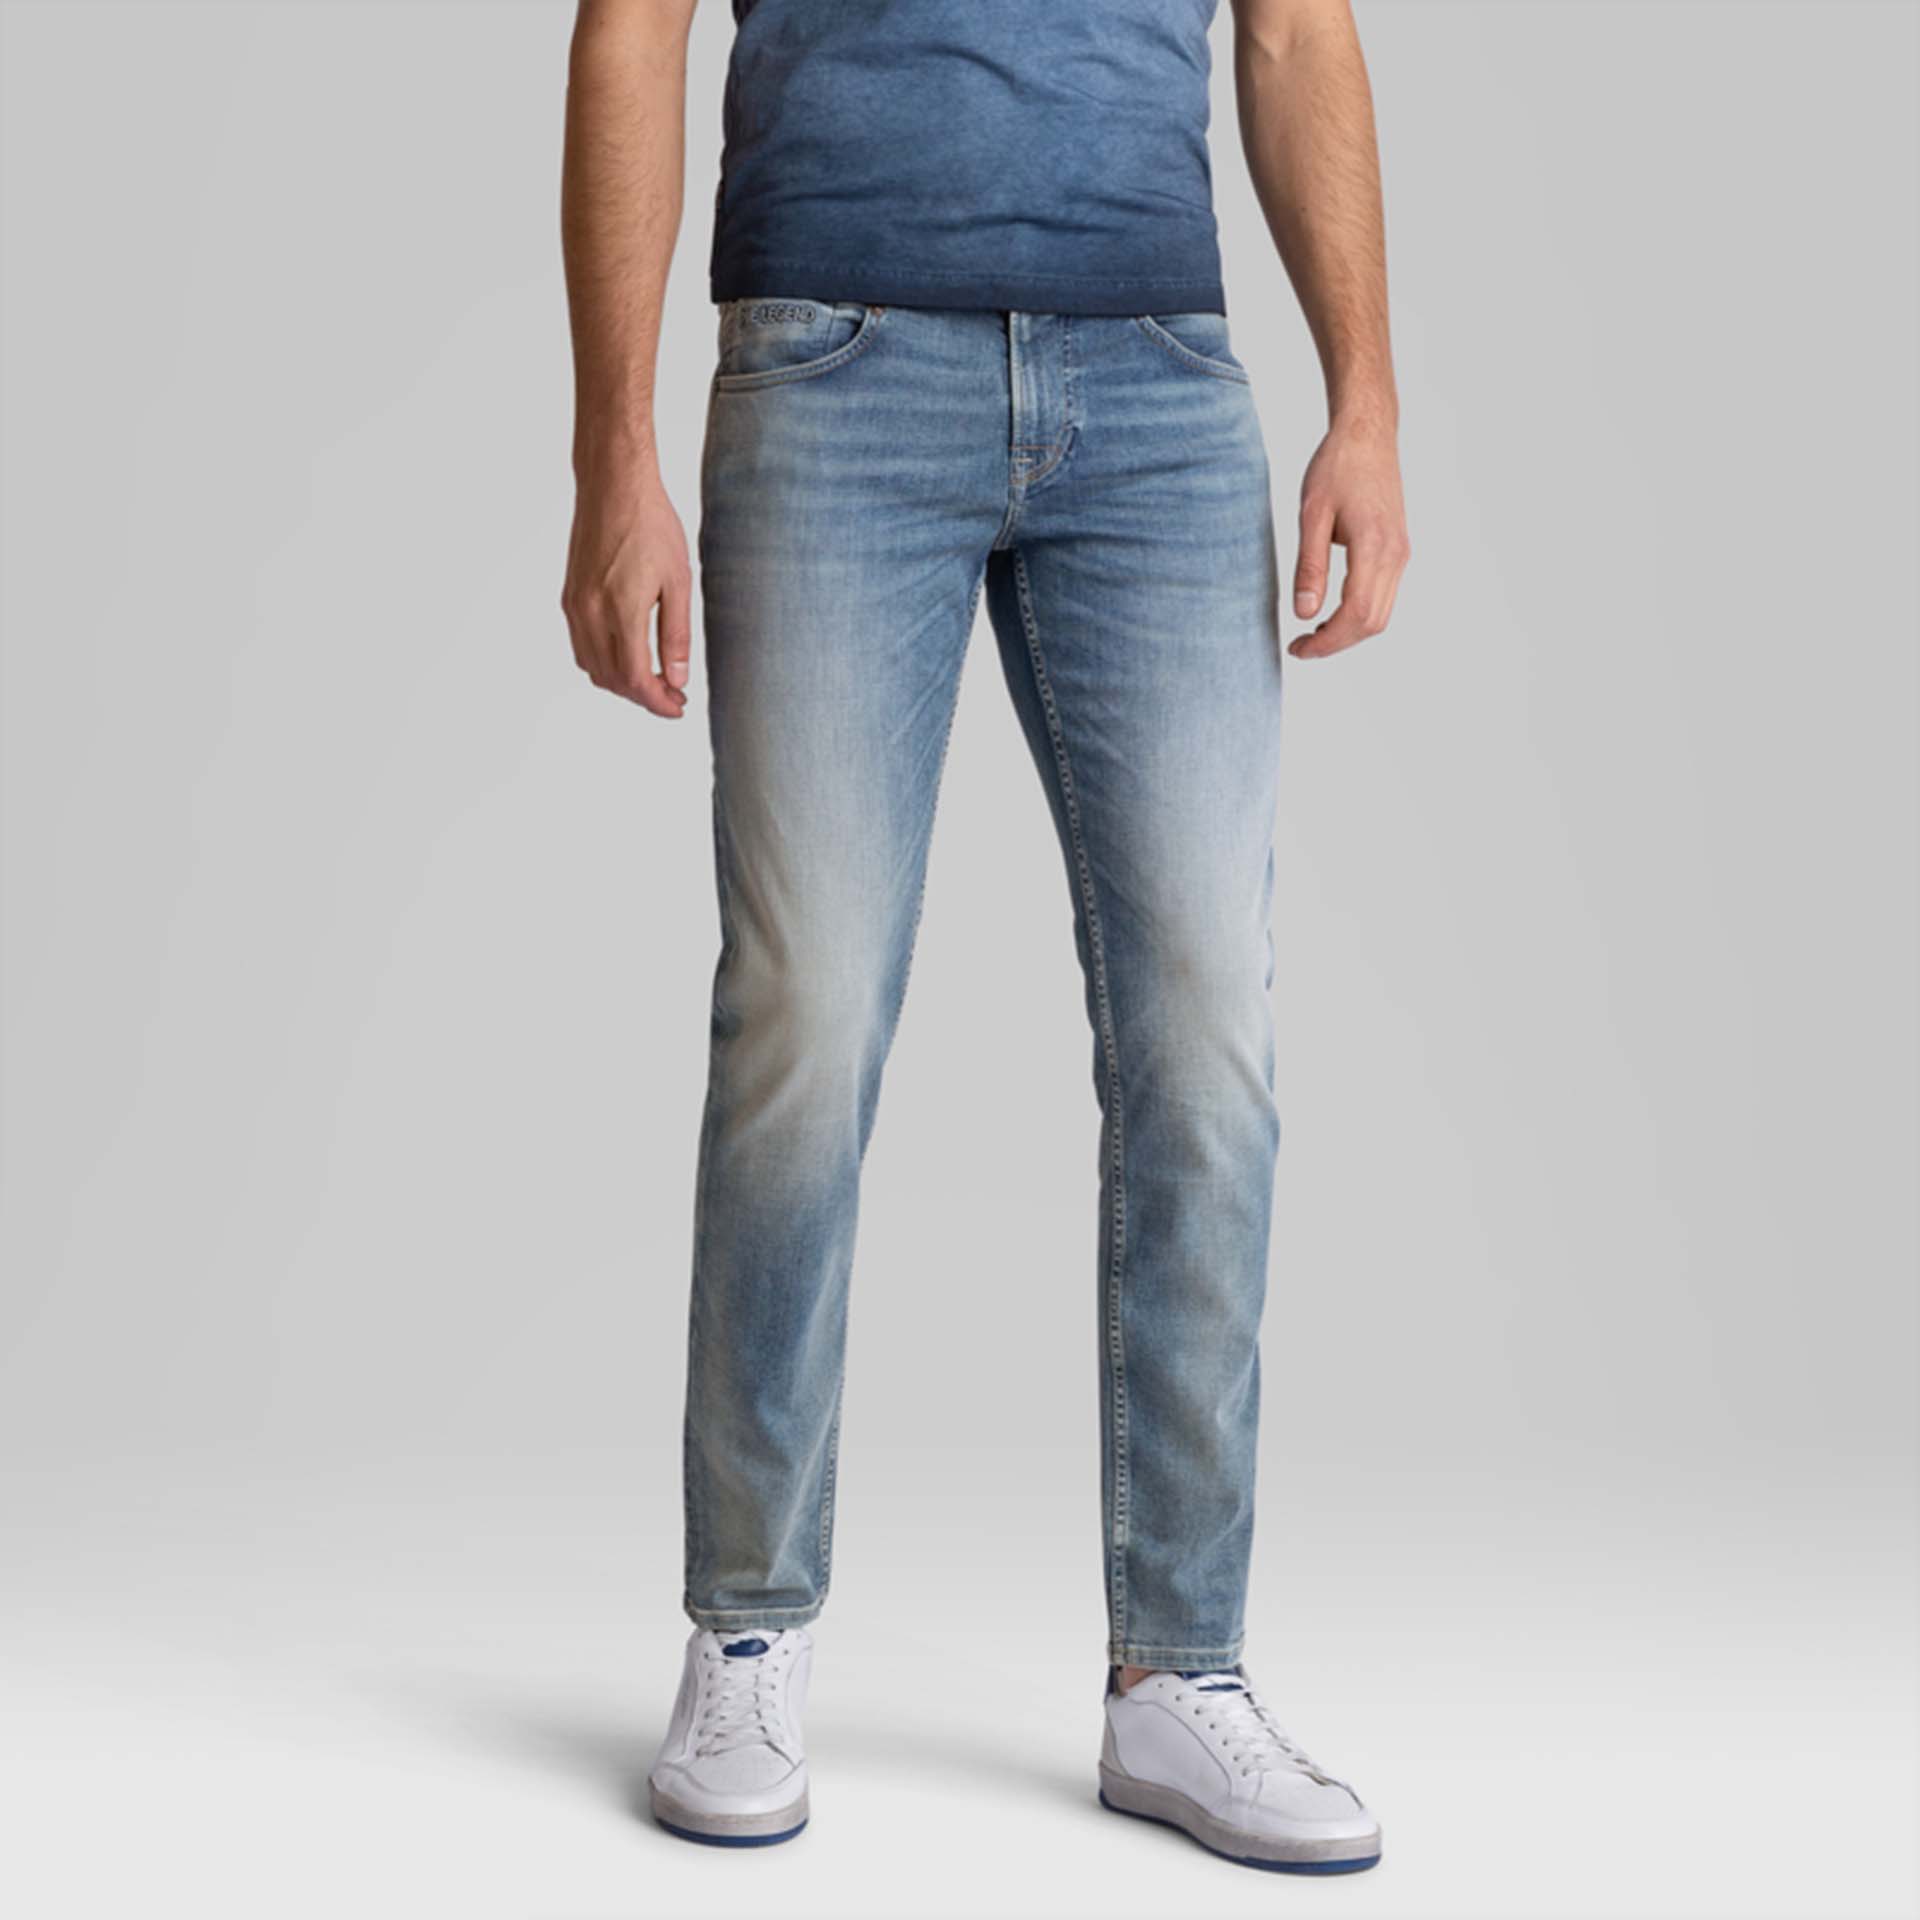 PME Legend Freighter Jeans